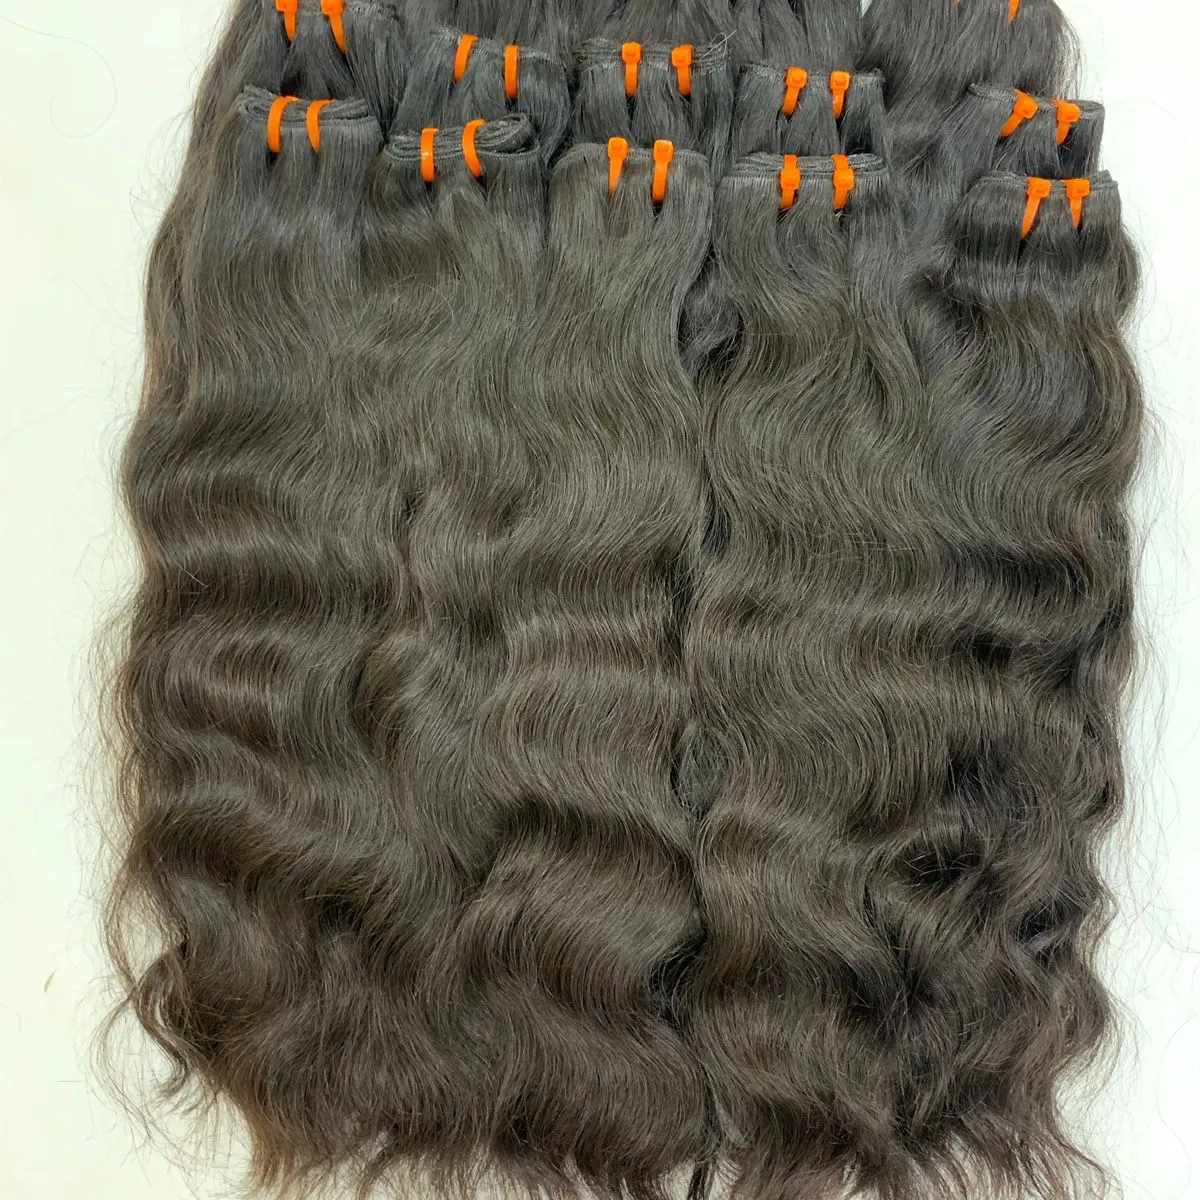 virgin indian hair Extension Full Cuticle pelo humano natural Curly Hair Extensions